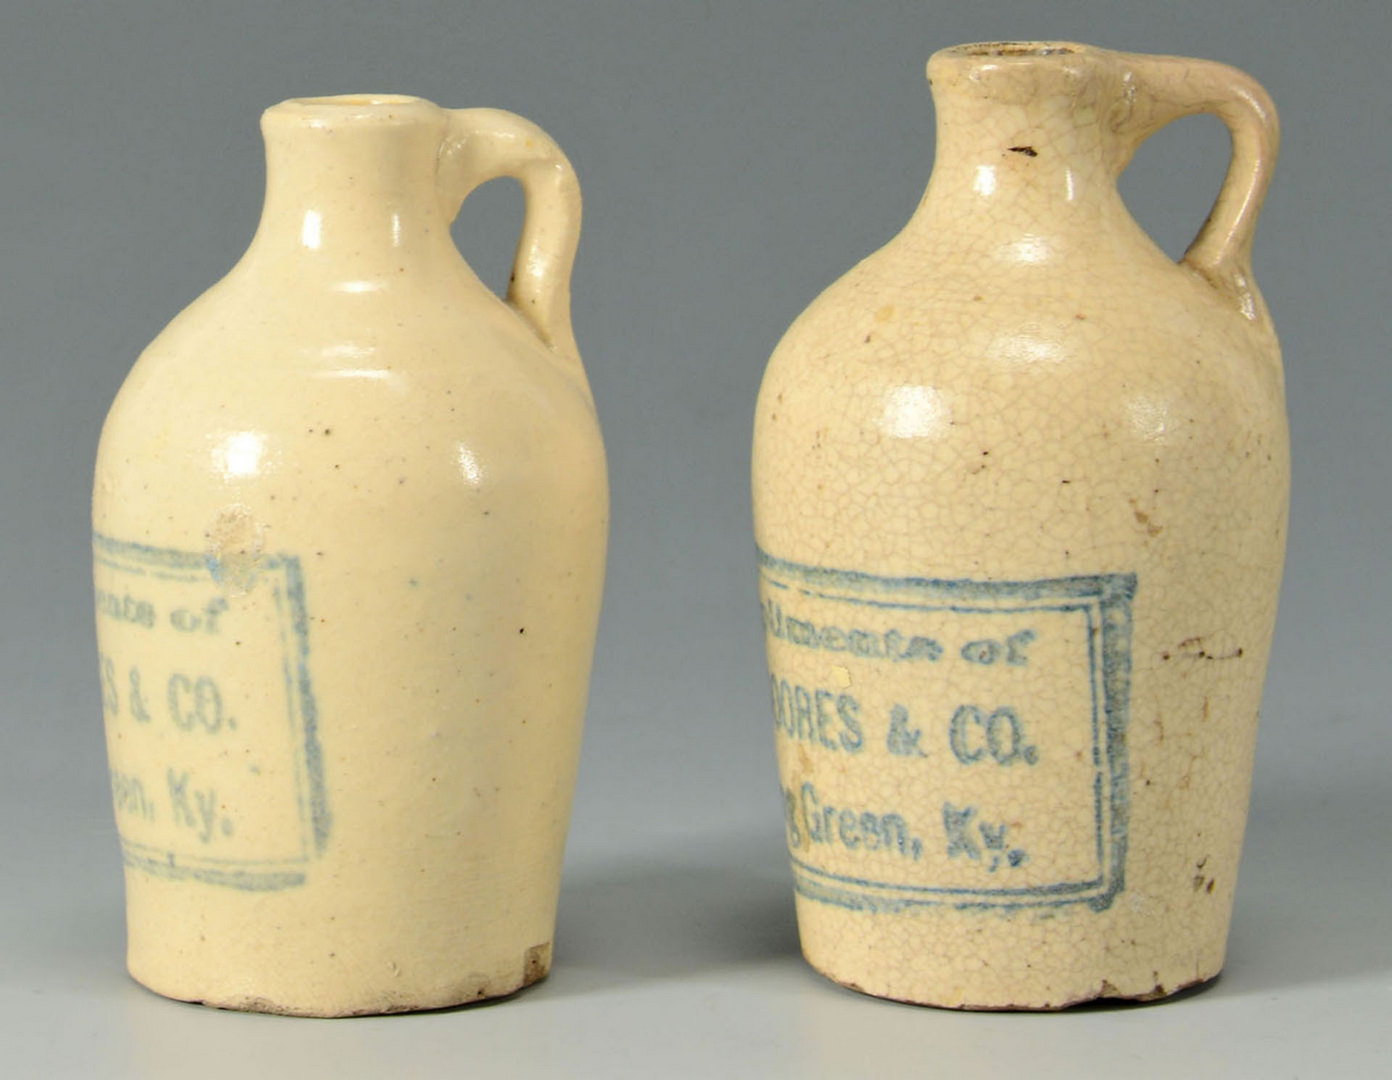 Lot 120: 2 Miniature Whiskey Jugs, Doores, Bowling Green KY